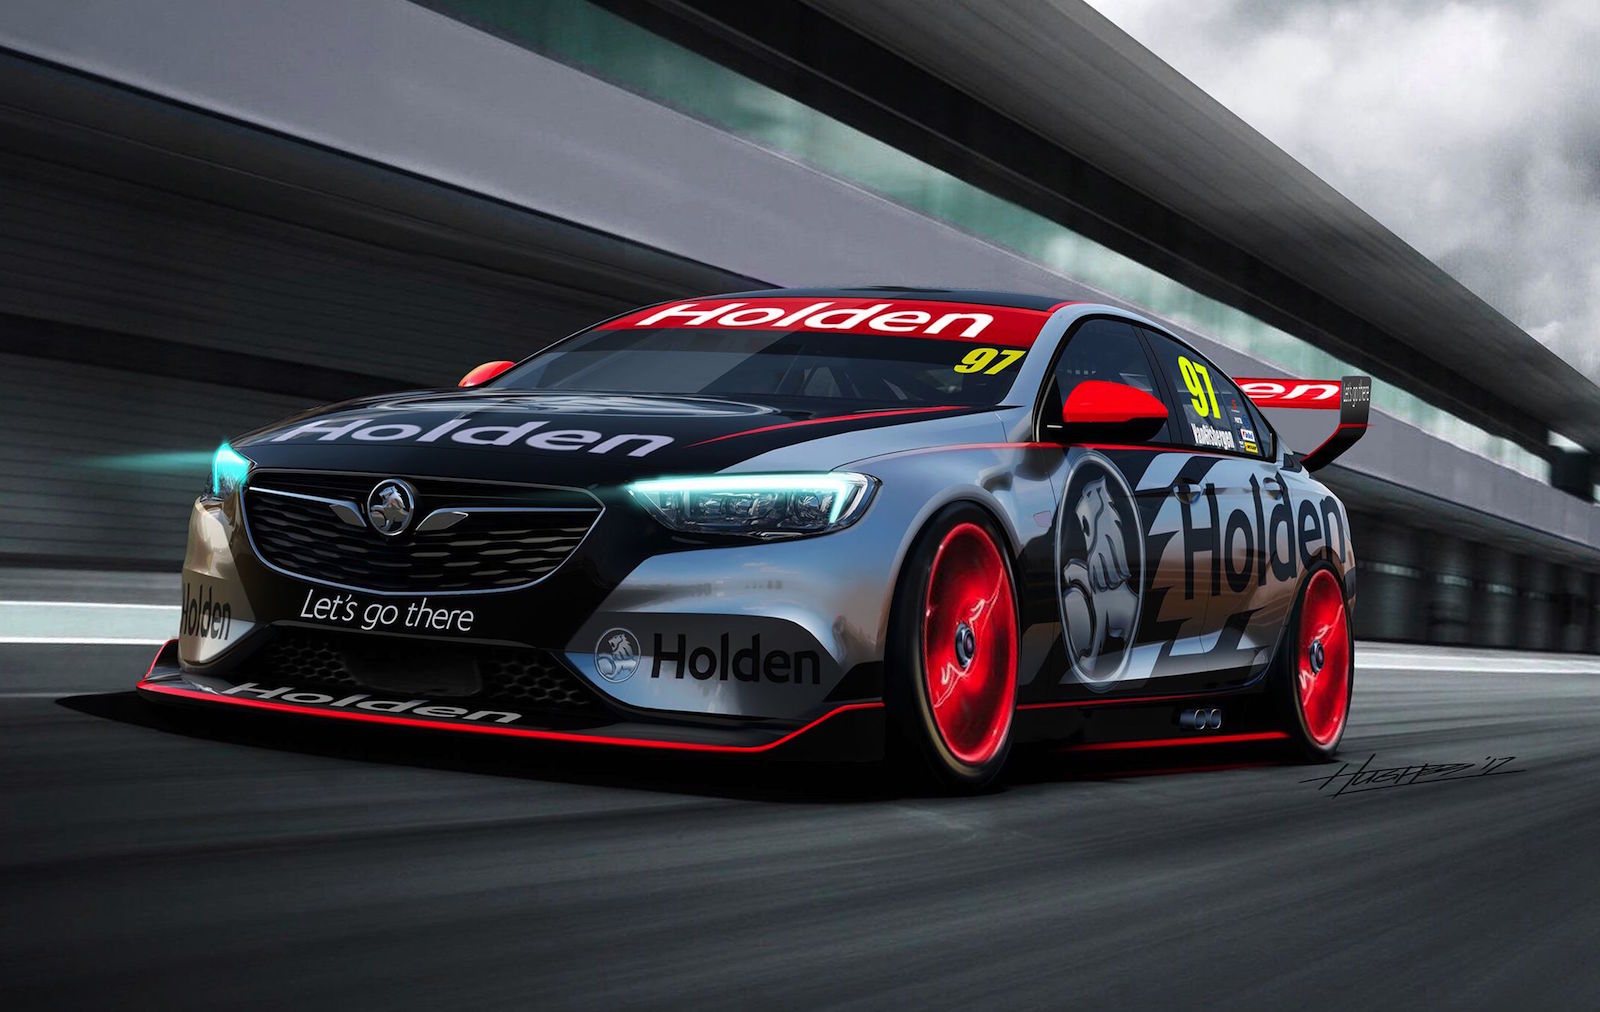 2018 Holden Commodore Supercar race car revealed